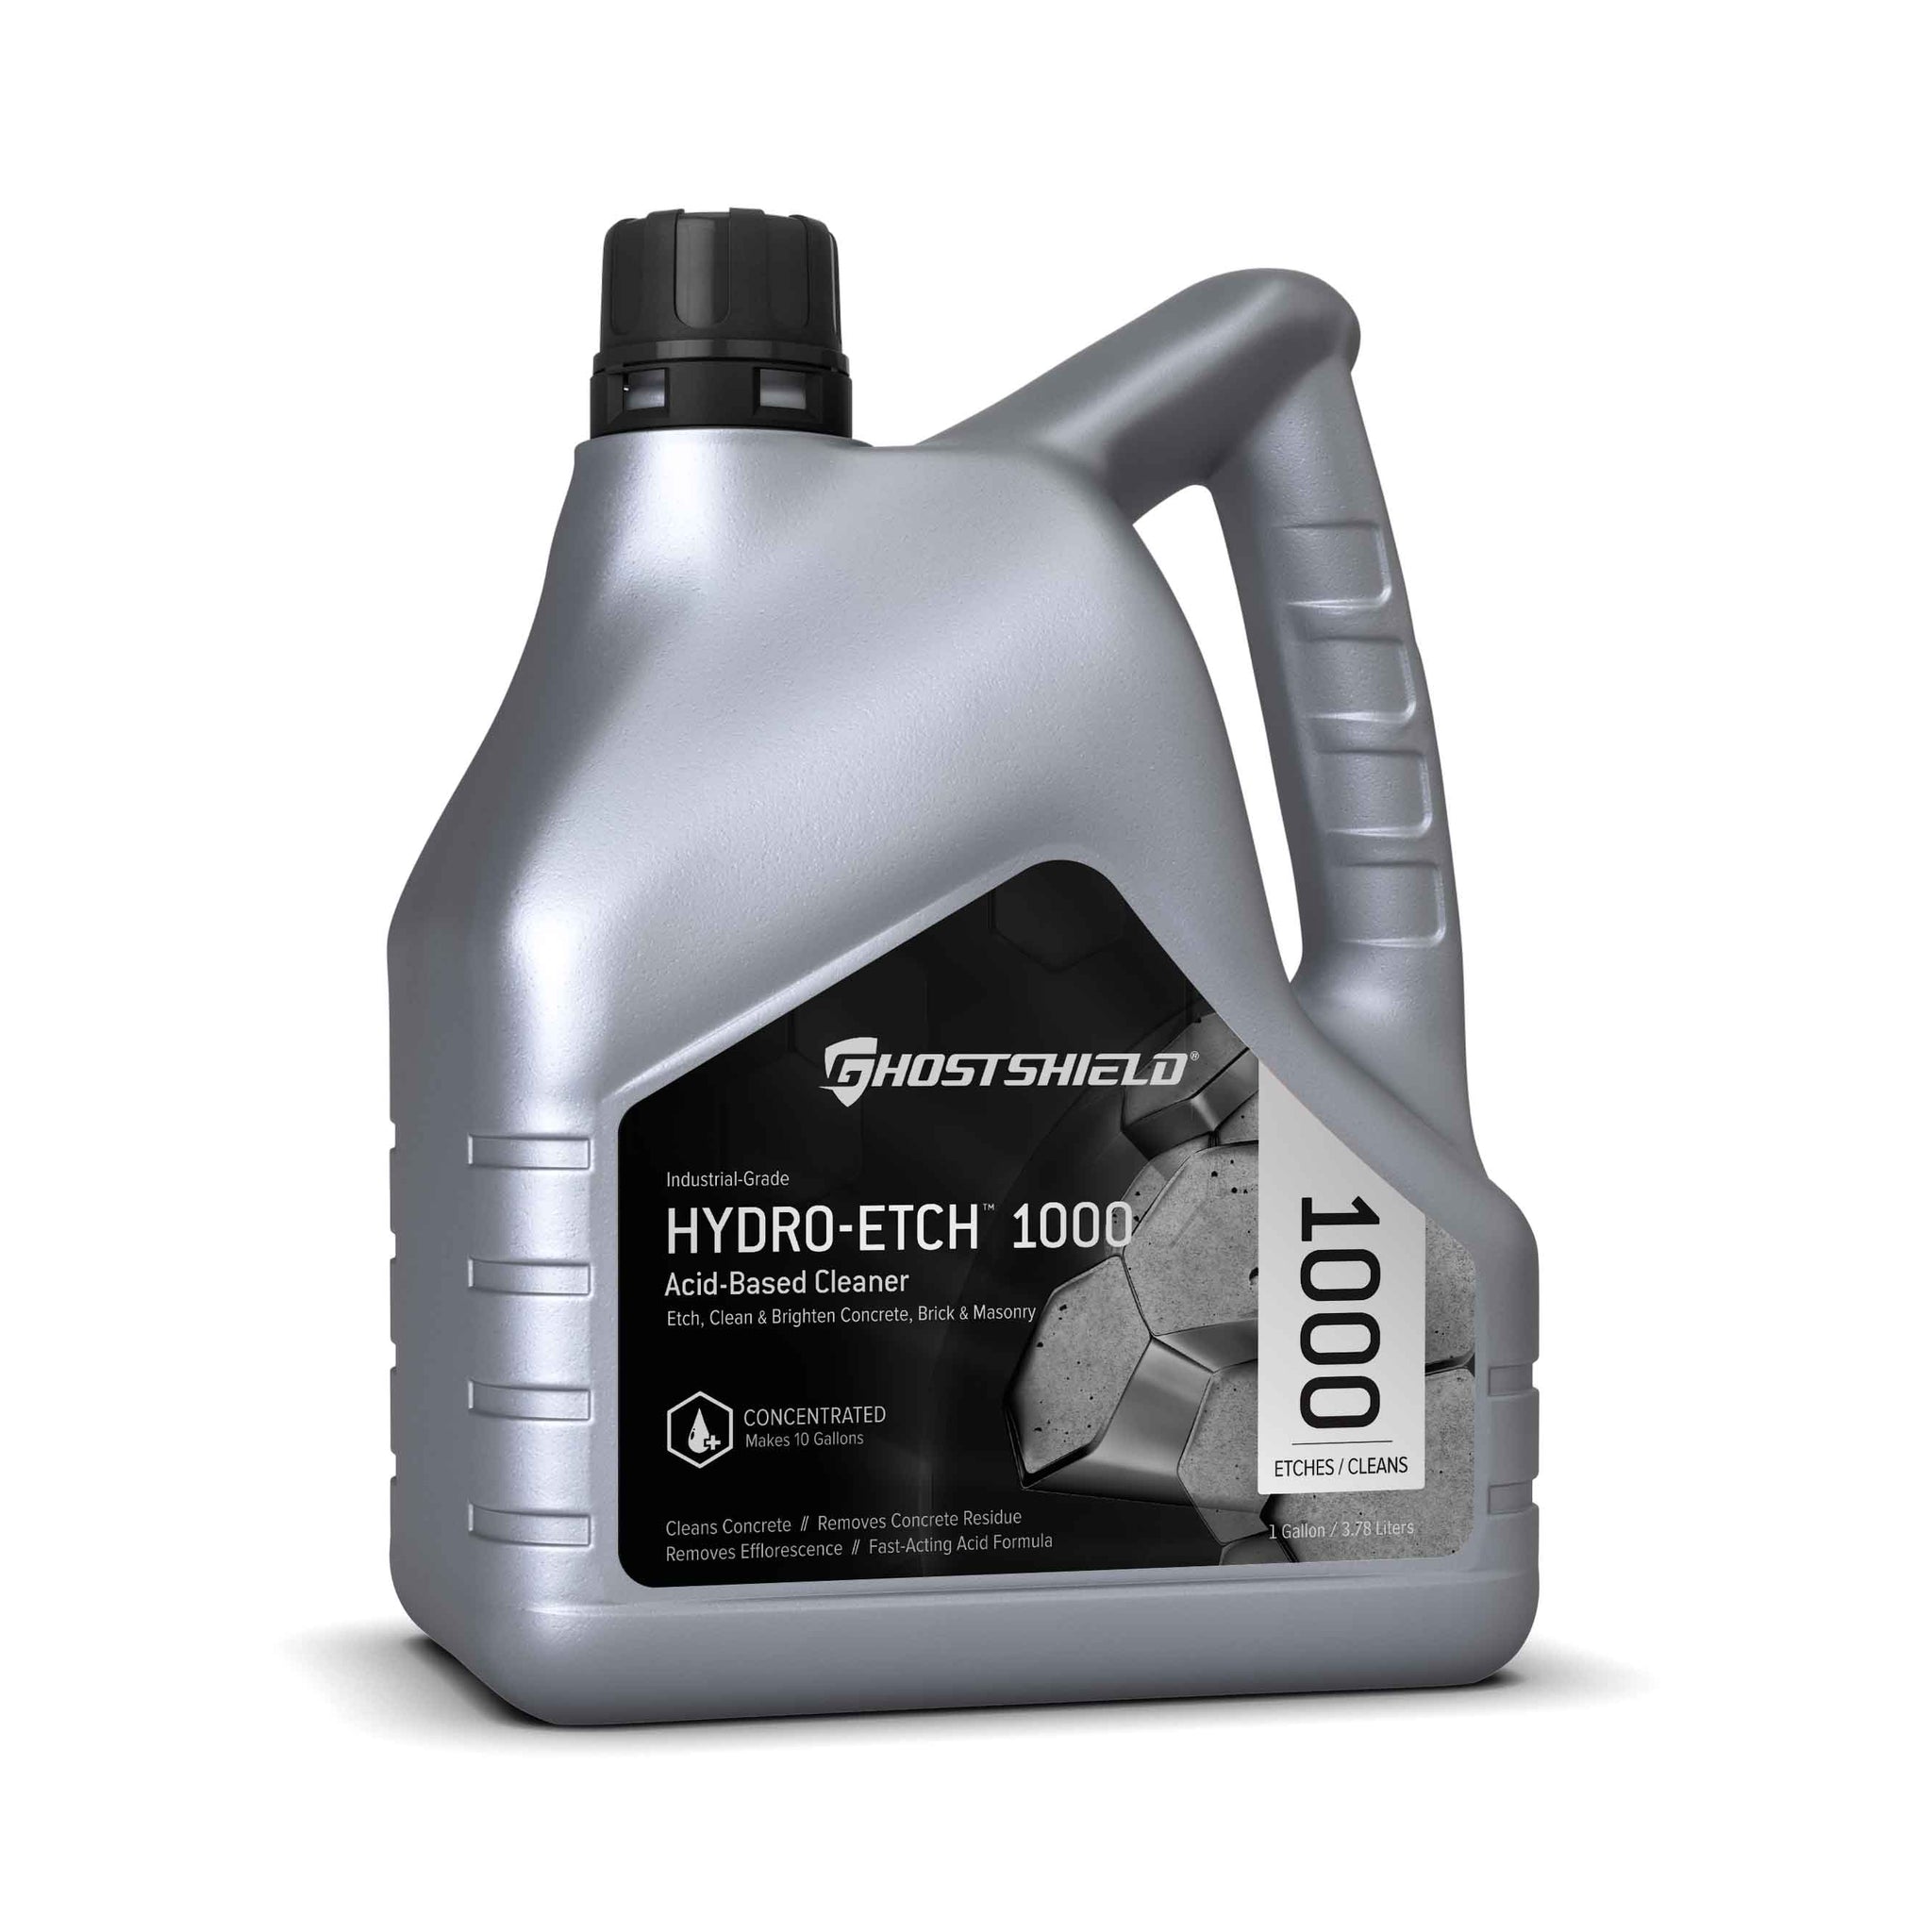 GhostShield Concentrated Hydro-Etch 1000 Etching Concrete Cleaner